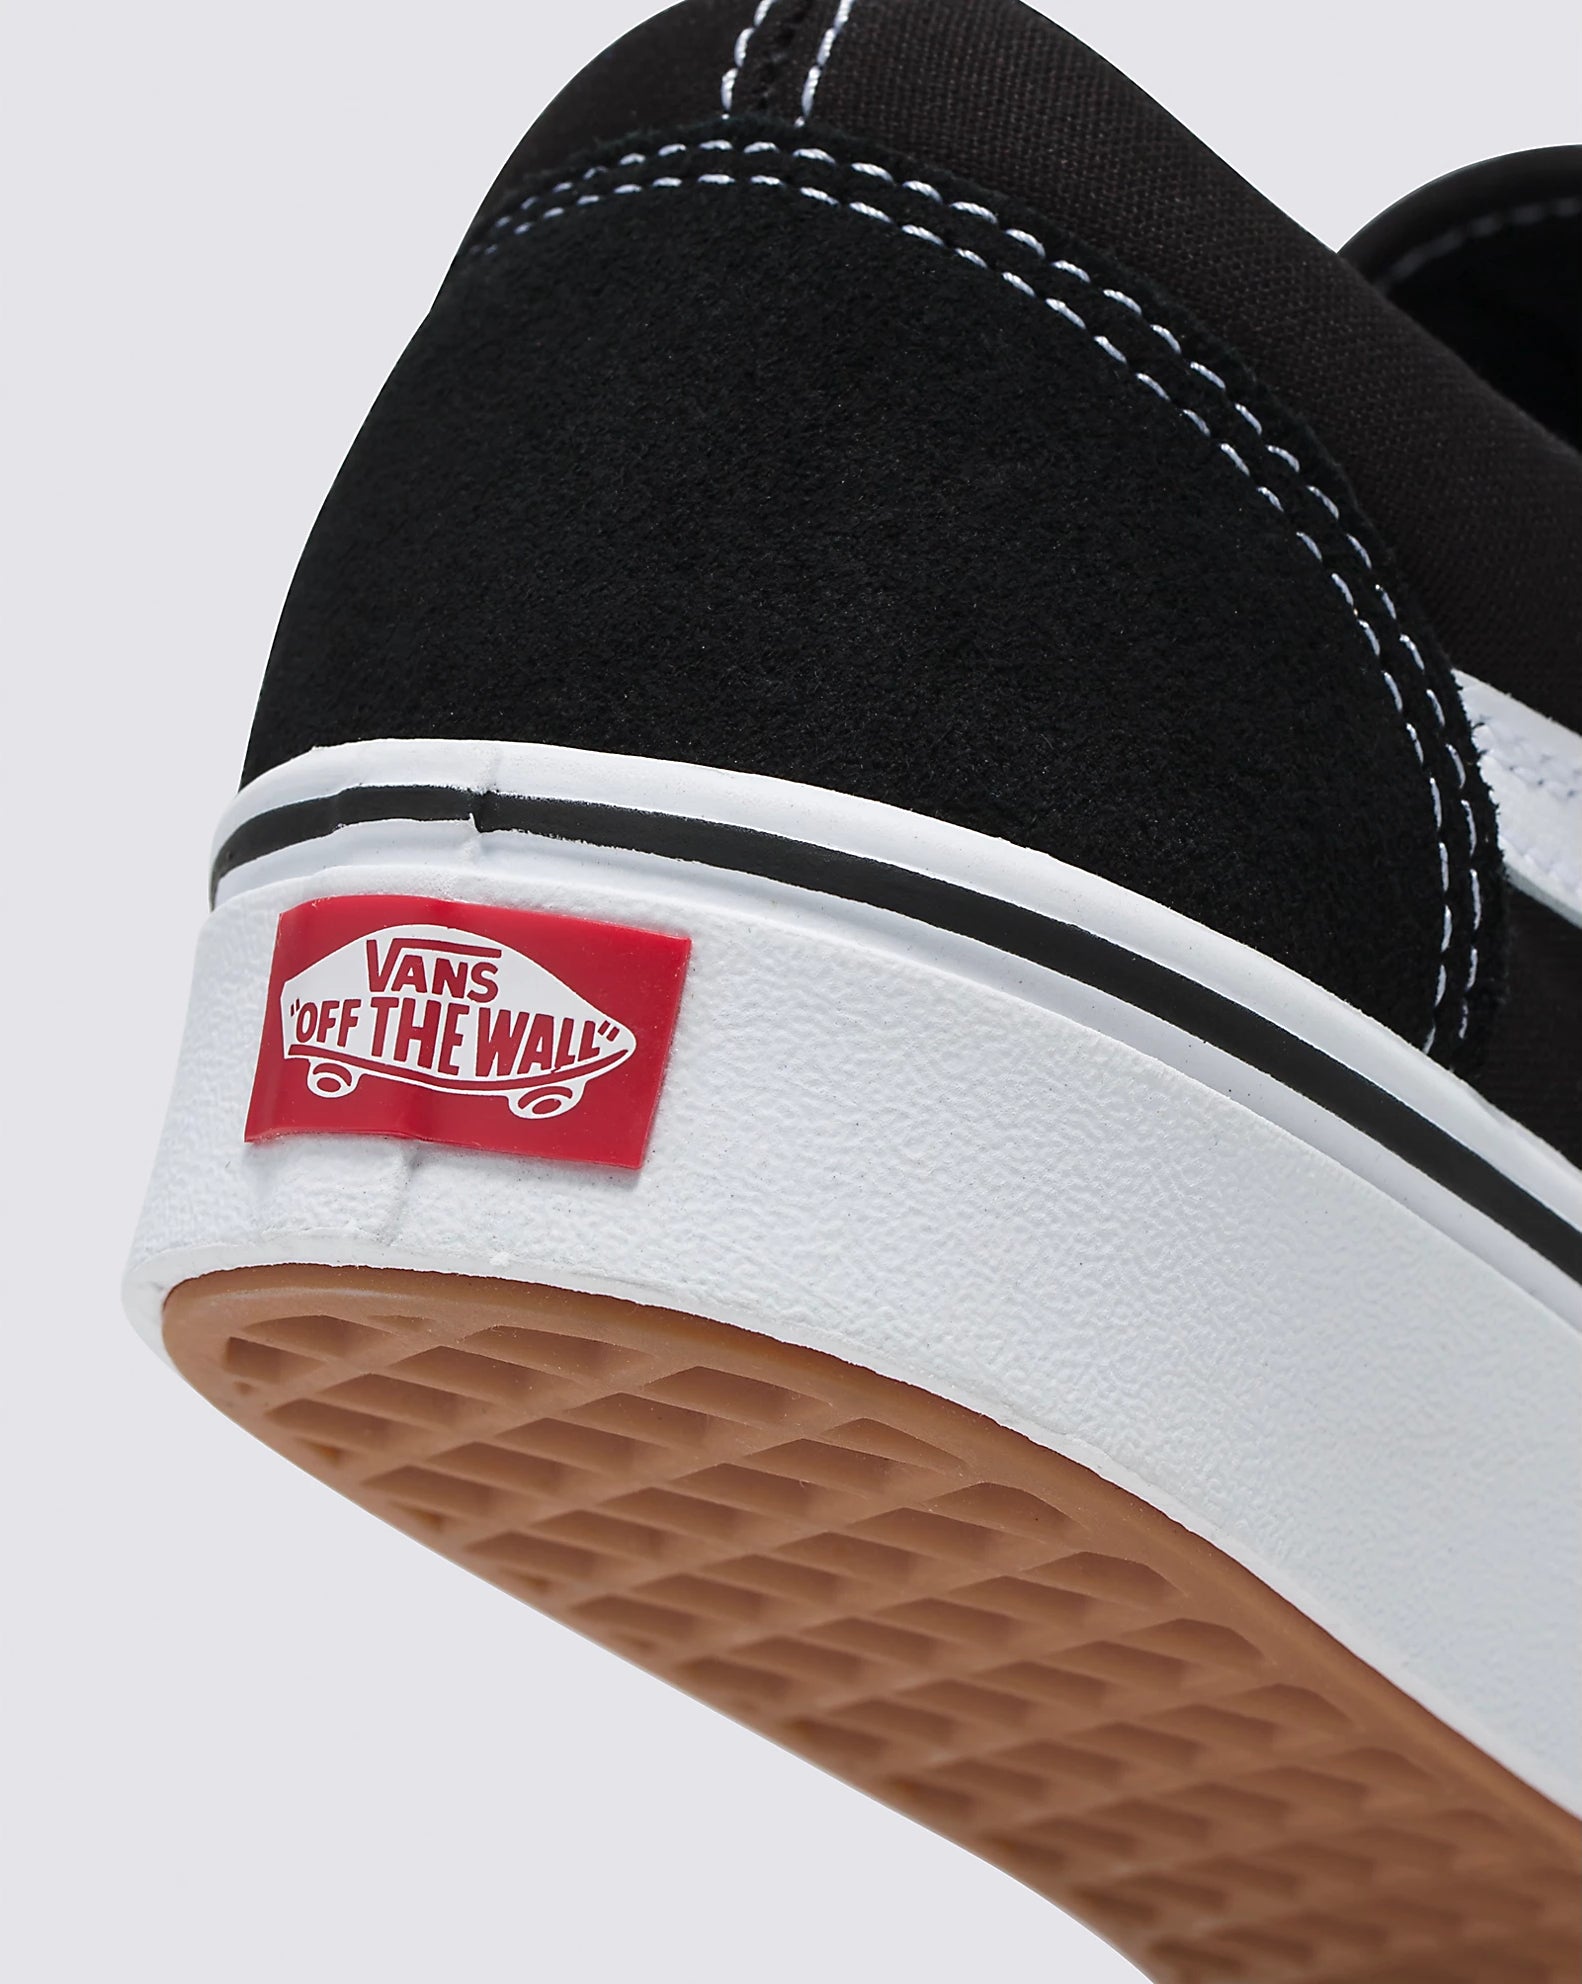 A black and white canvas lace-up skate shoe from Vans.